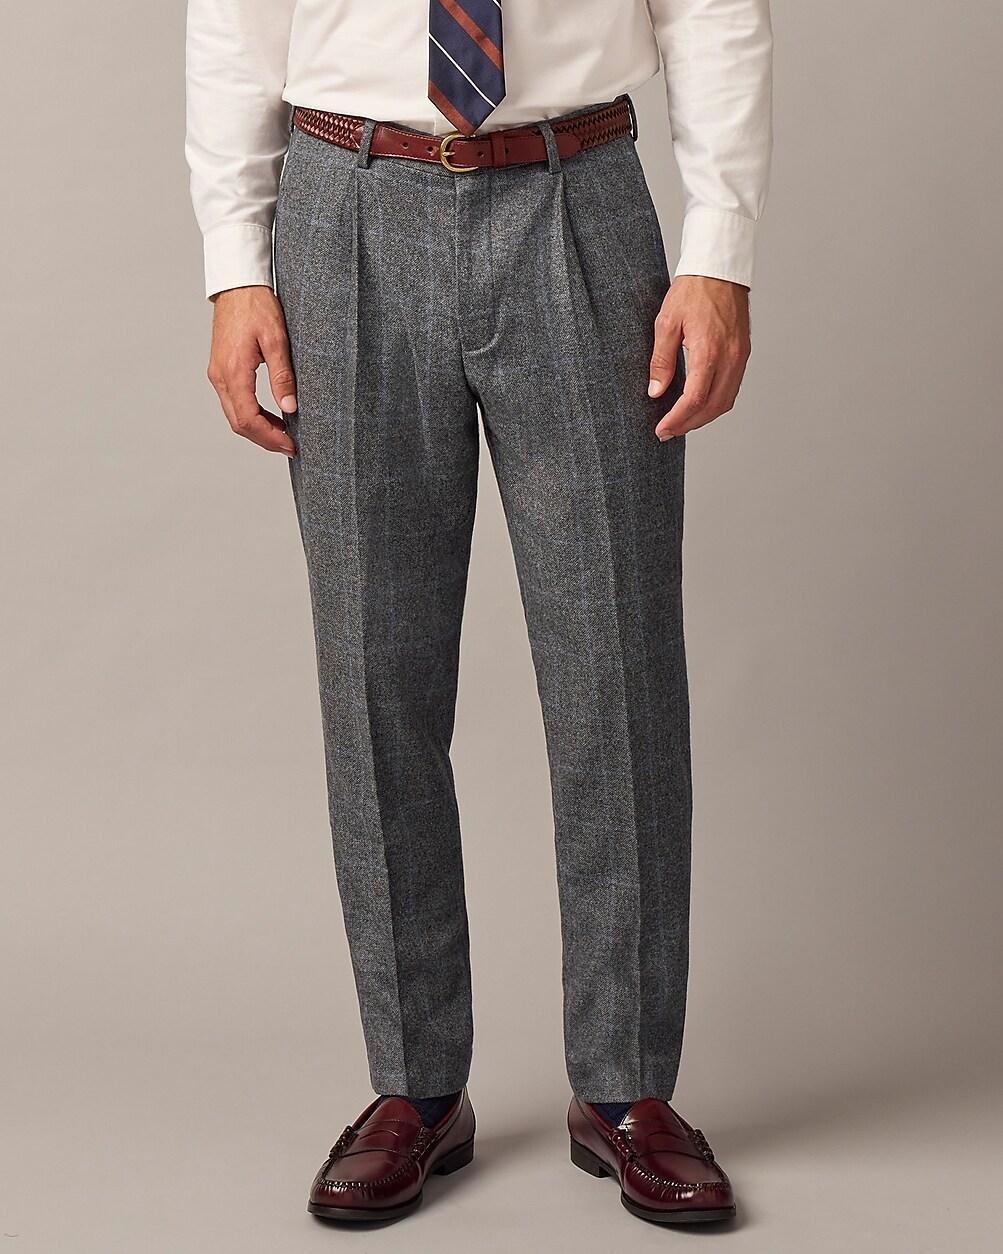 Ludlow Slim-fit suit pant in English cashmere Product Image